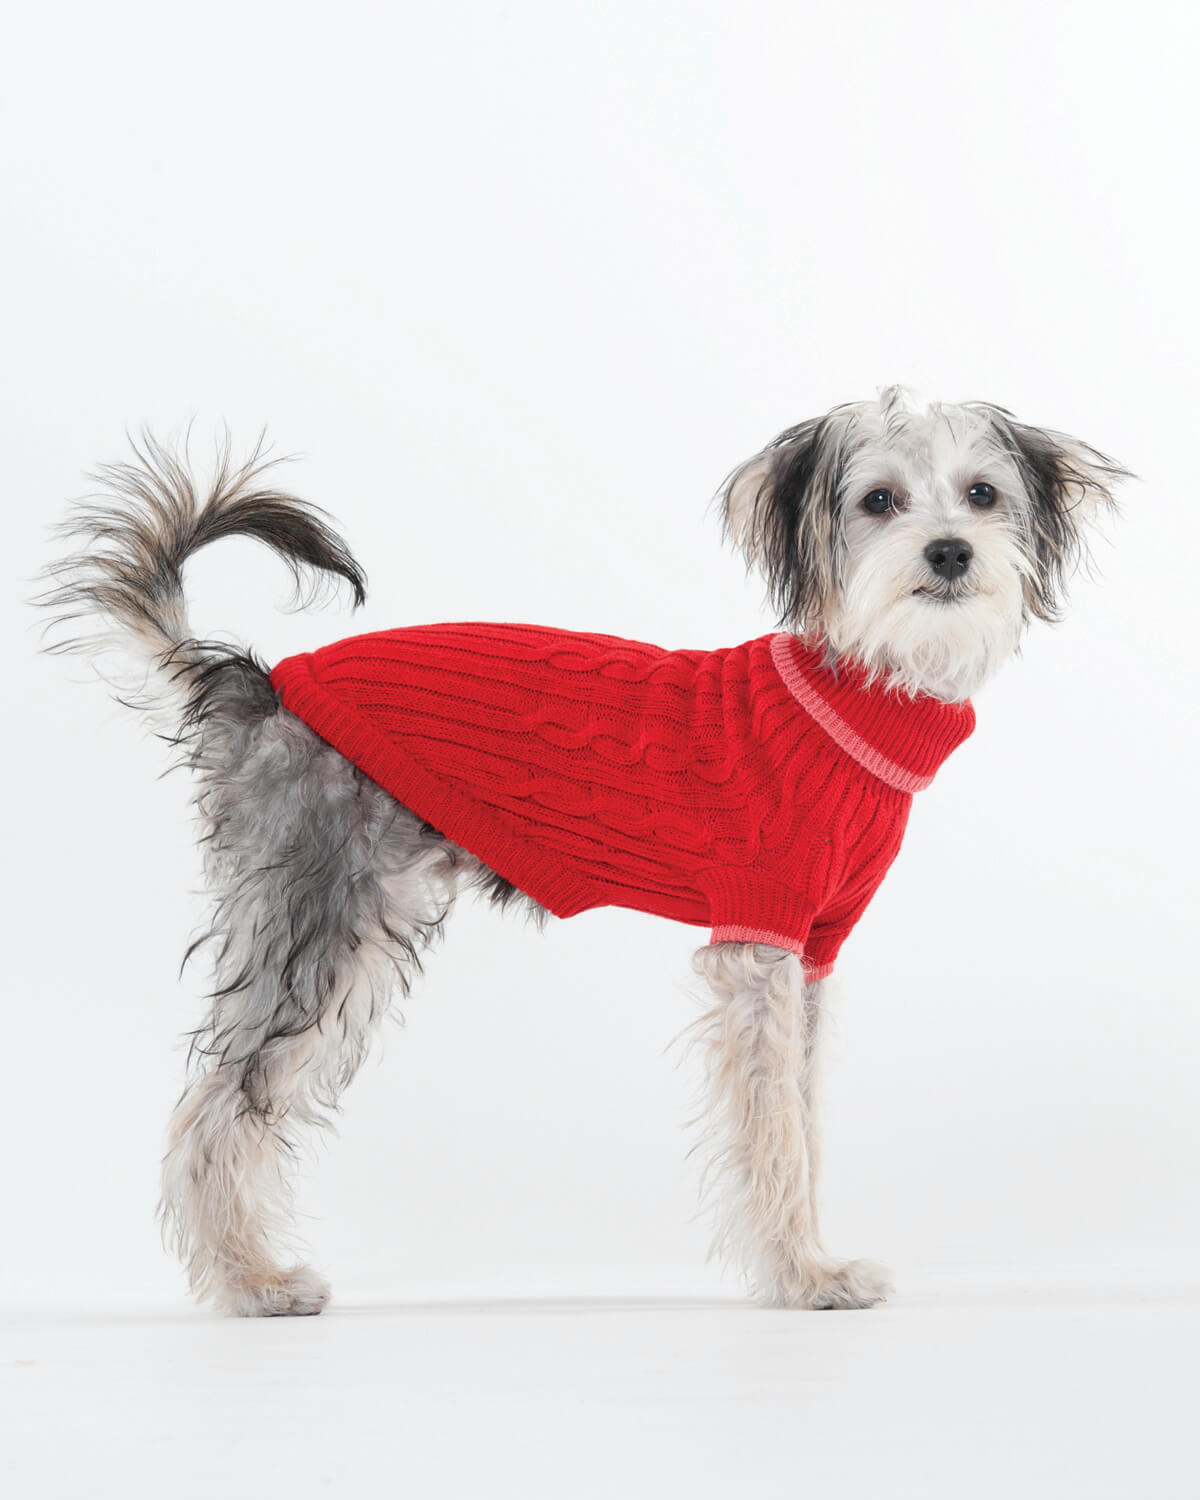 Dog posing in fashion pet dog sweater - red cableknit